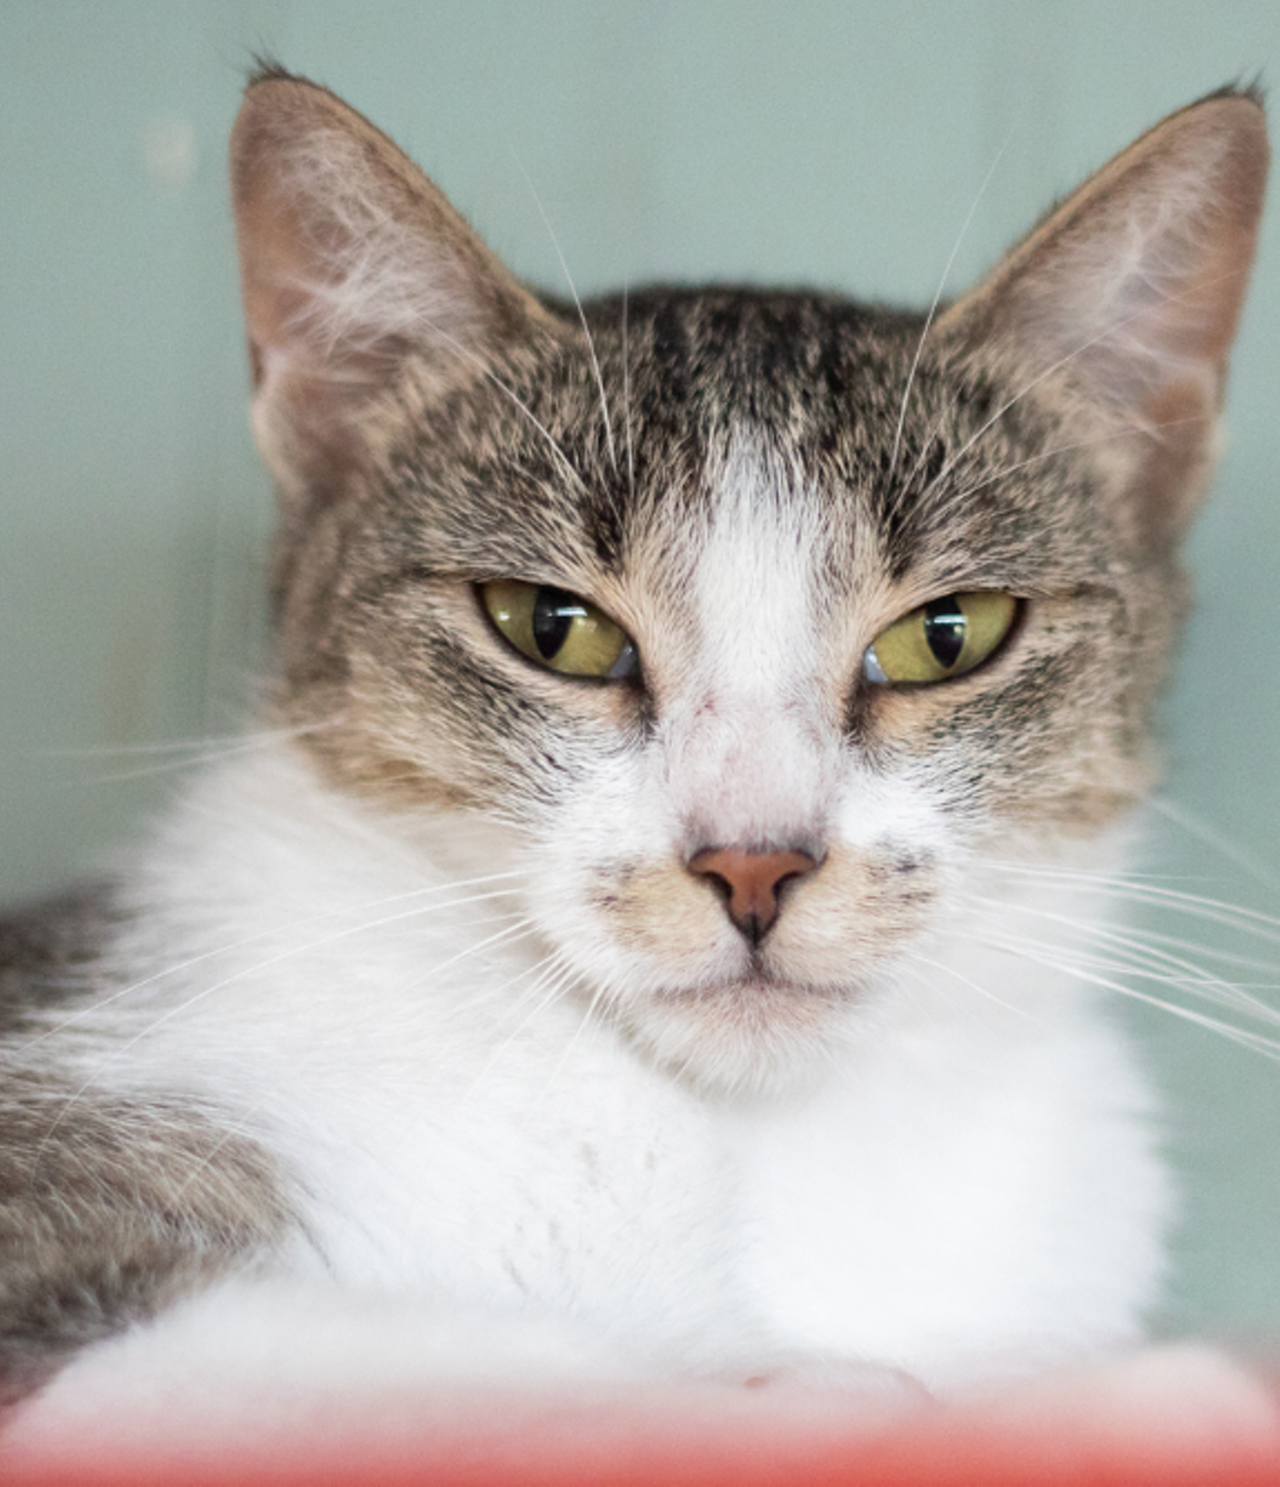 Skittles
"I’m an active and playful kitty who can entertain you for hours with my wild antics. I do know how to calm and down and I love a good snuggle. “Taste the Rainbow” and come adopt me today!"